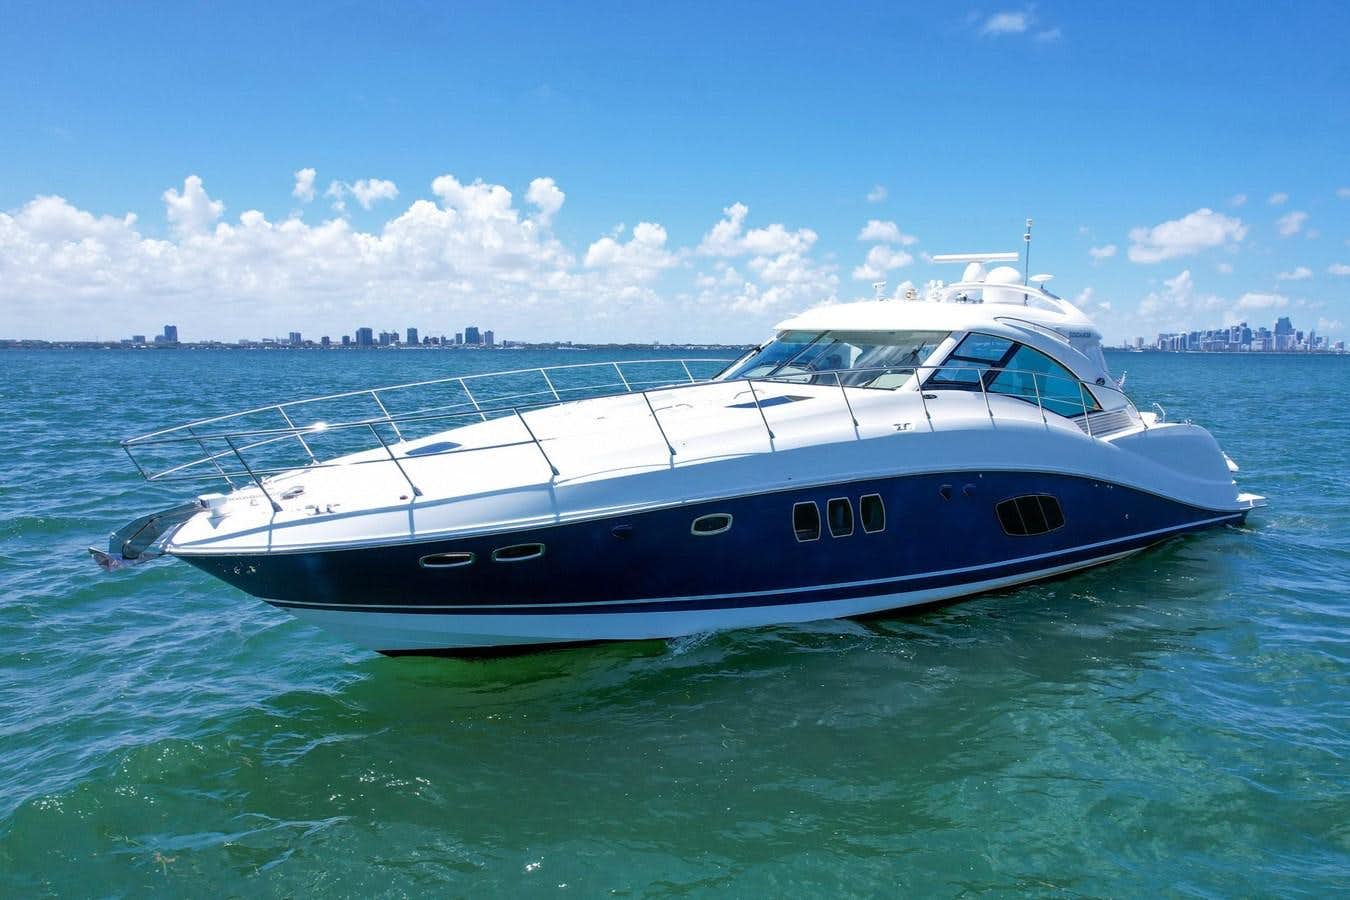 Make my day
Yacht for Sale